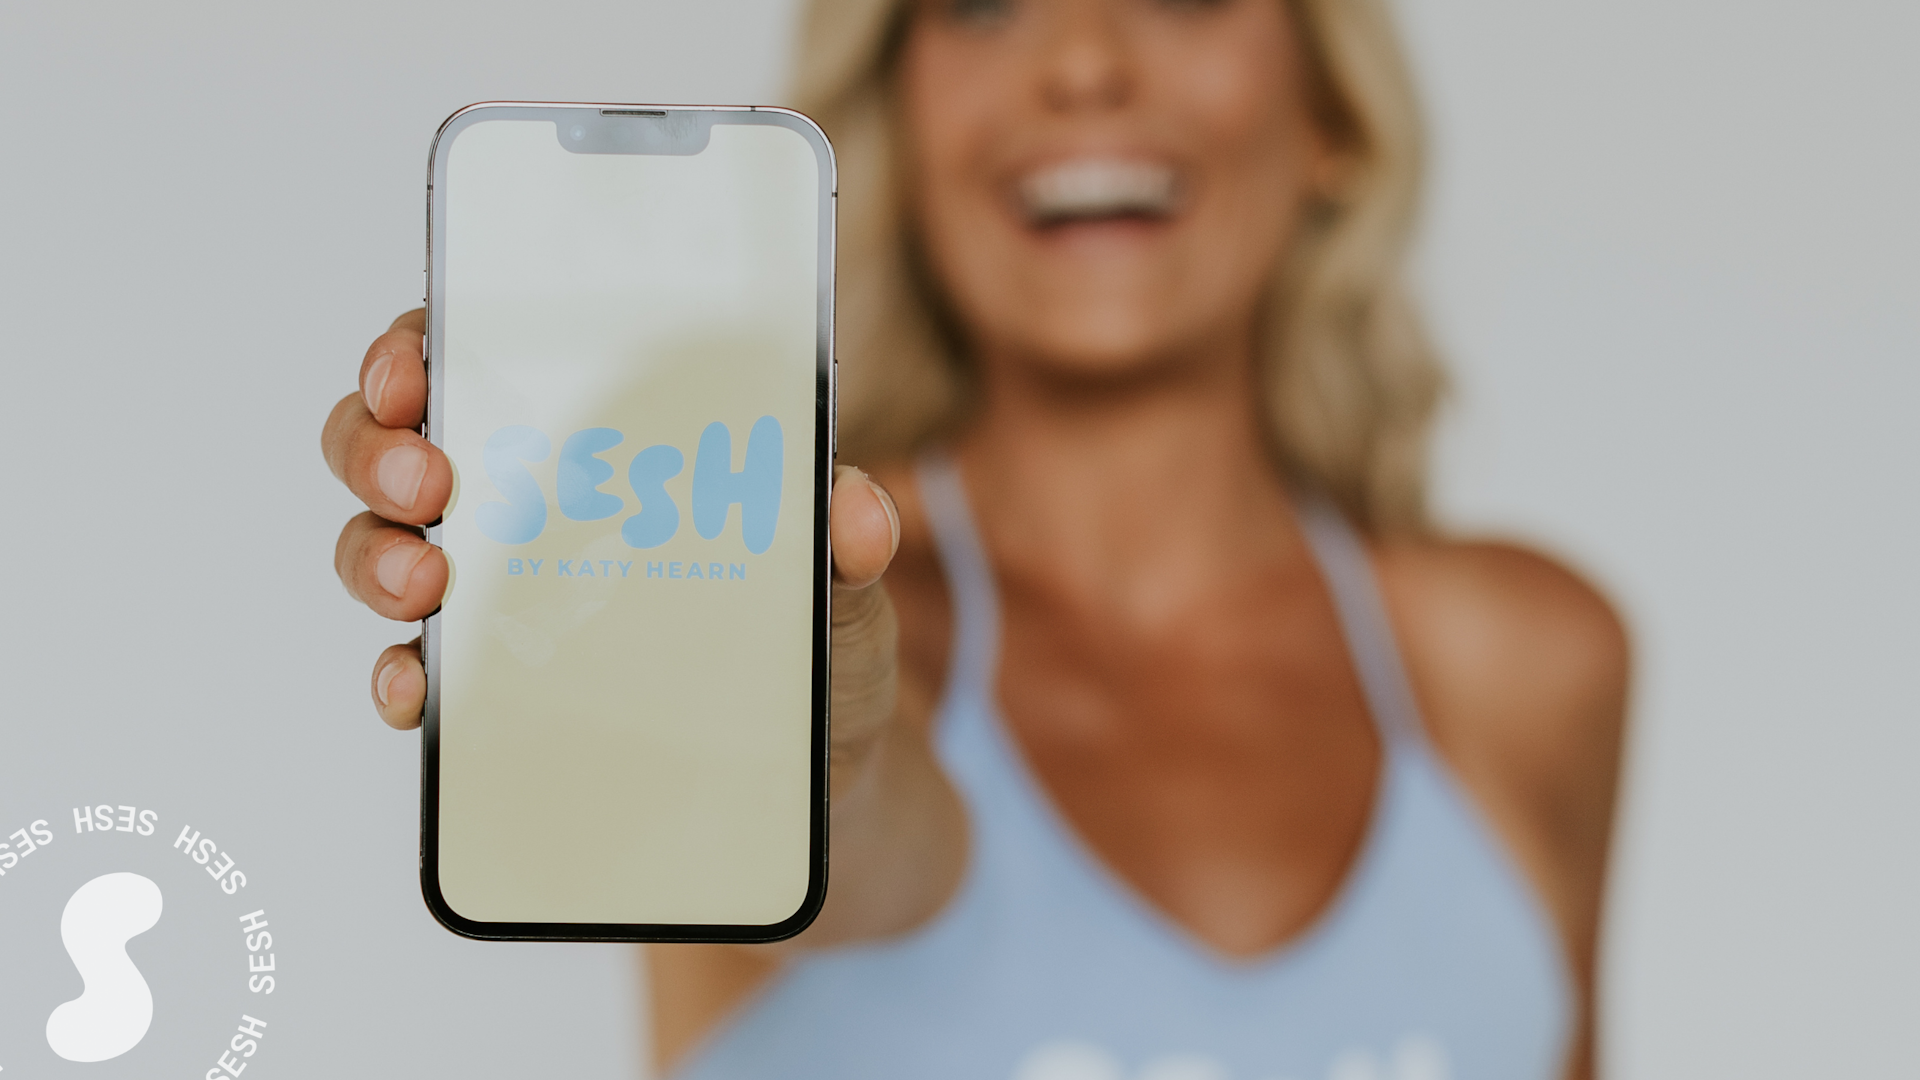 Get Started With The Sesh App